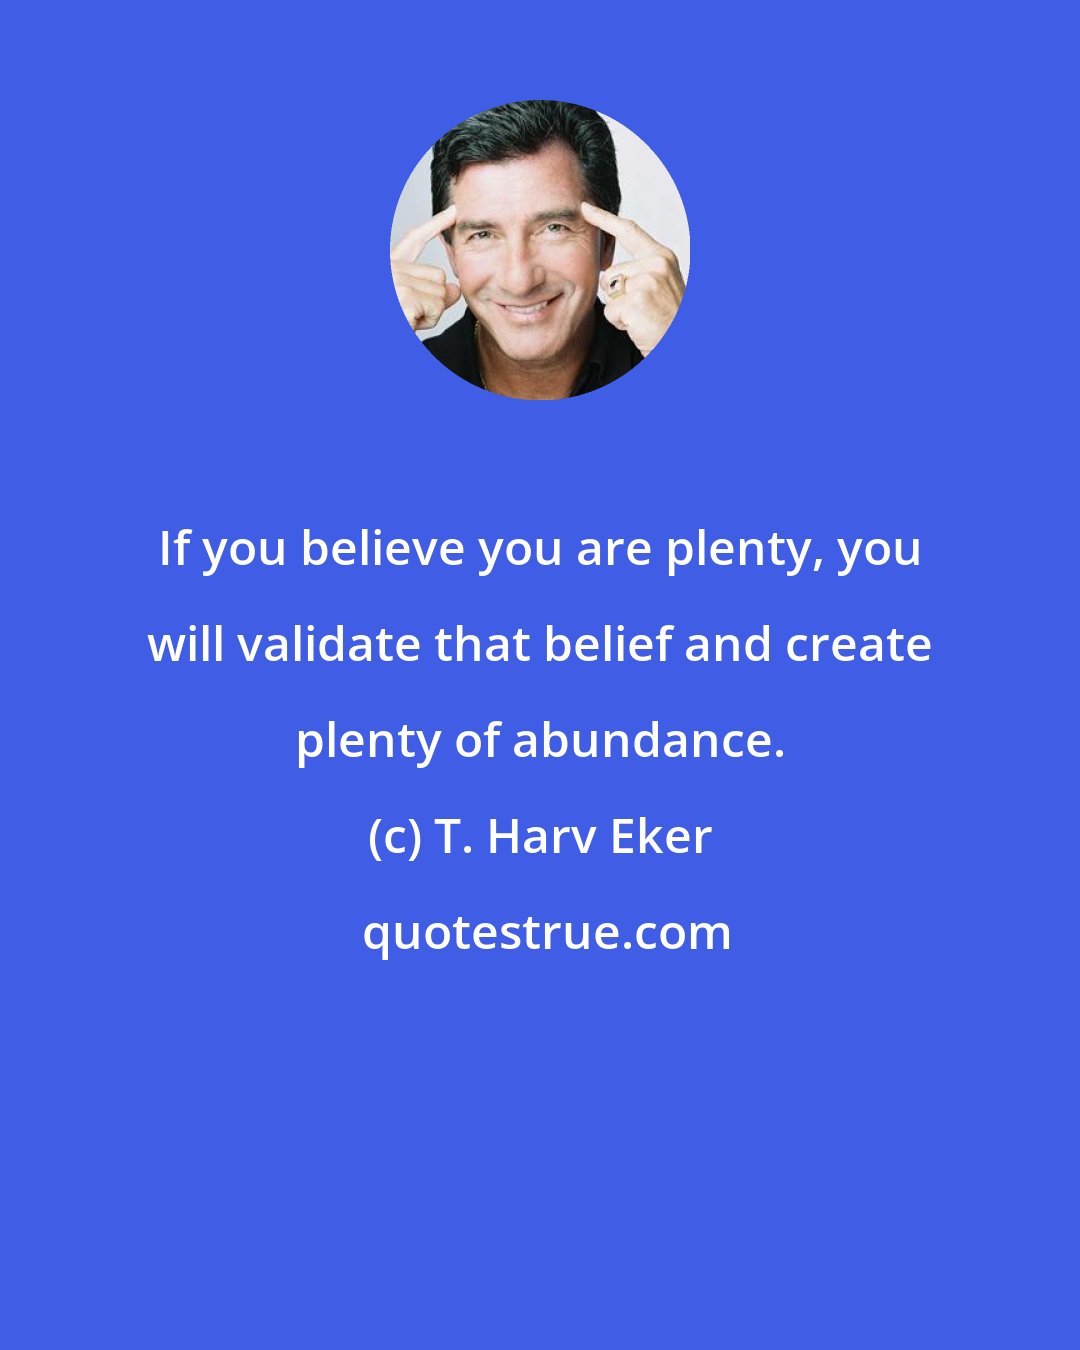 T. Harv Eker: If you believe you are plenty, you will validate that belief and create plenty of abundance.